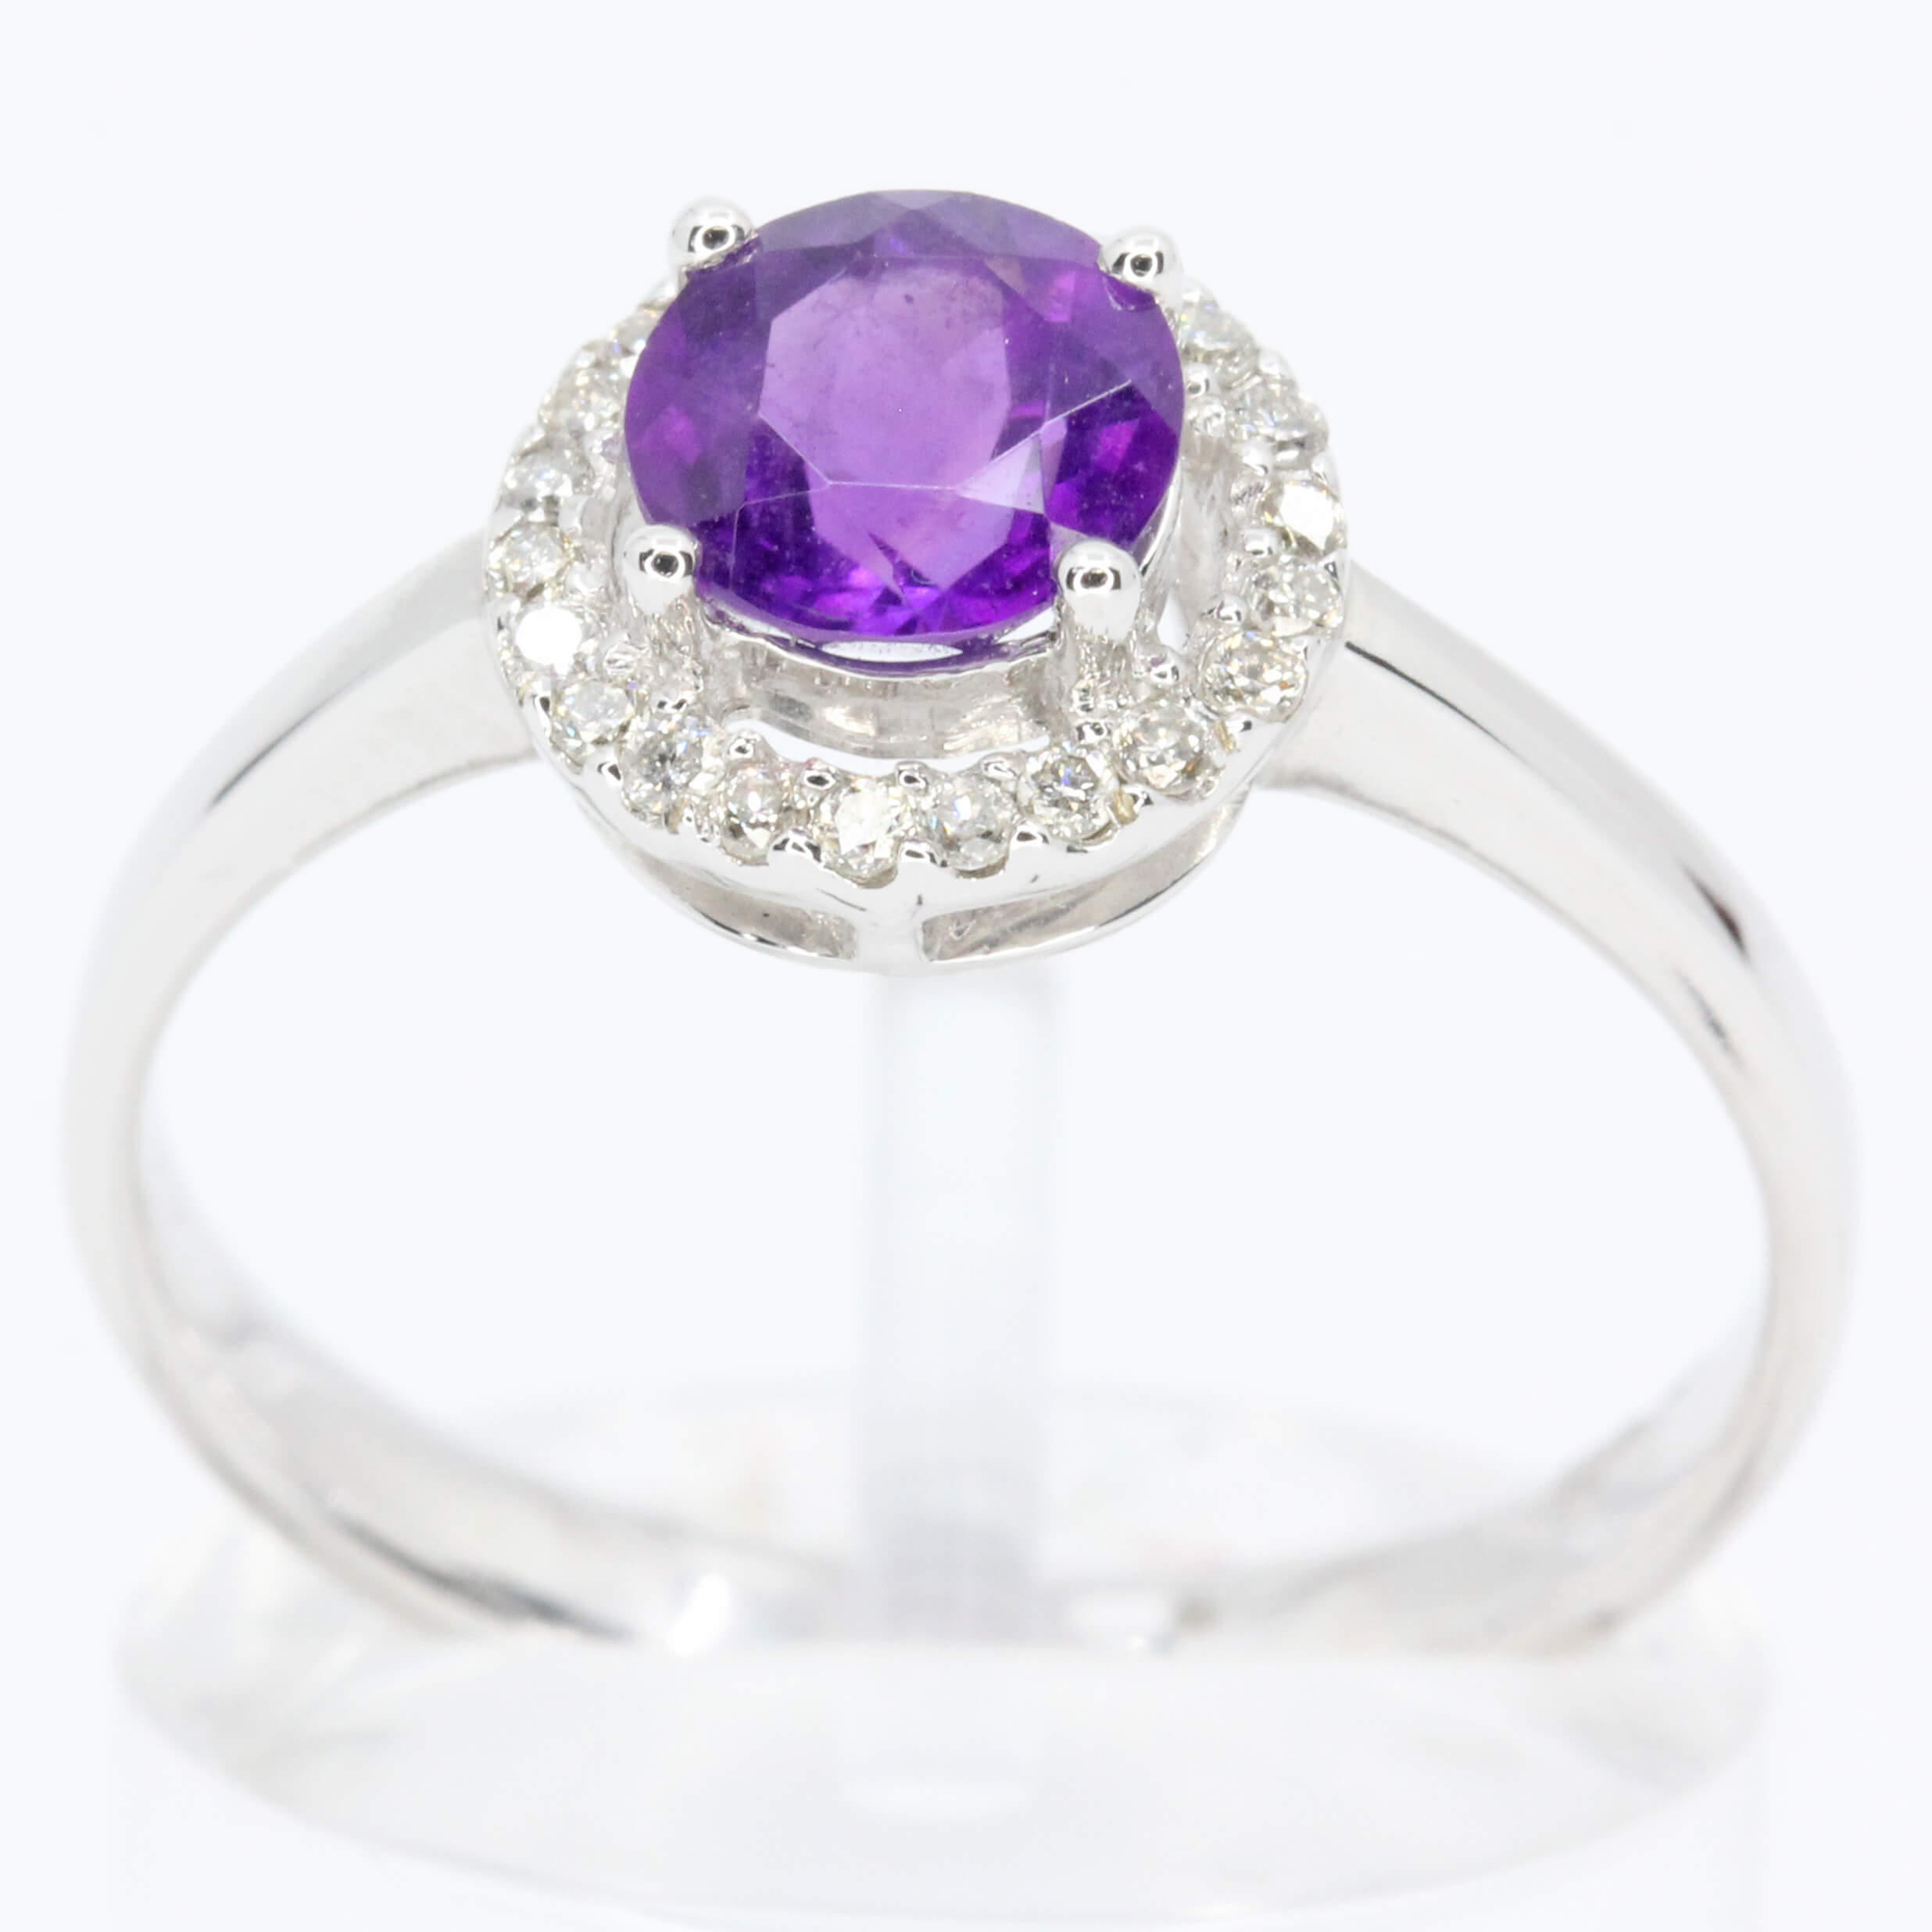 18ct White Gold Amethyst and Diamonds Ring | Allgem Jewellers